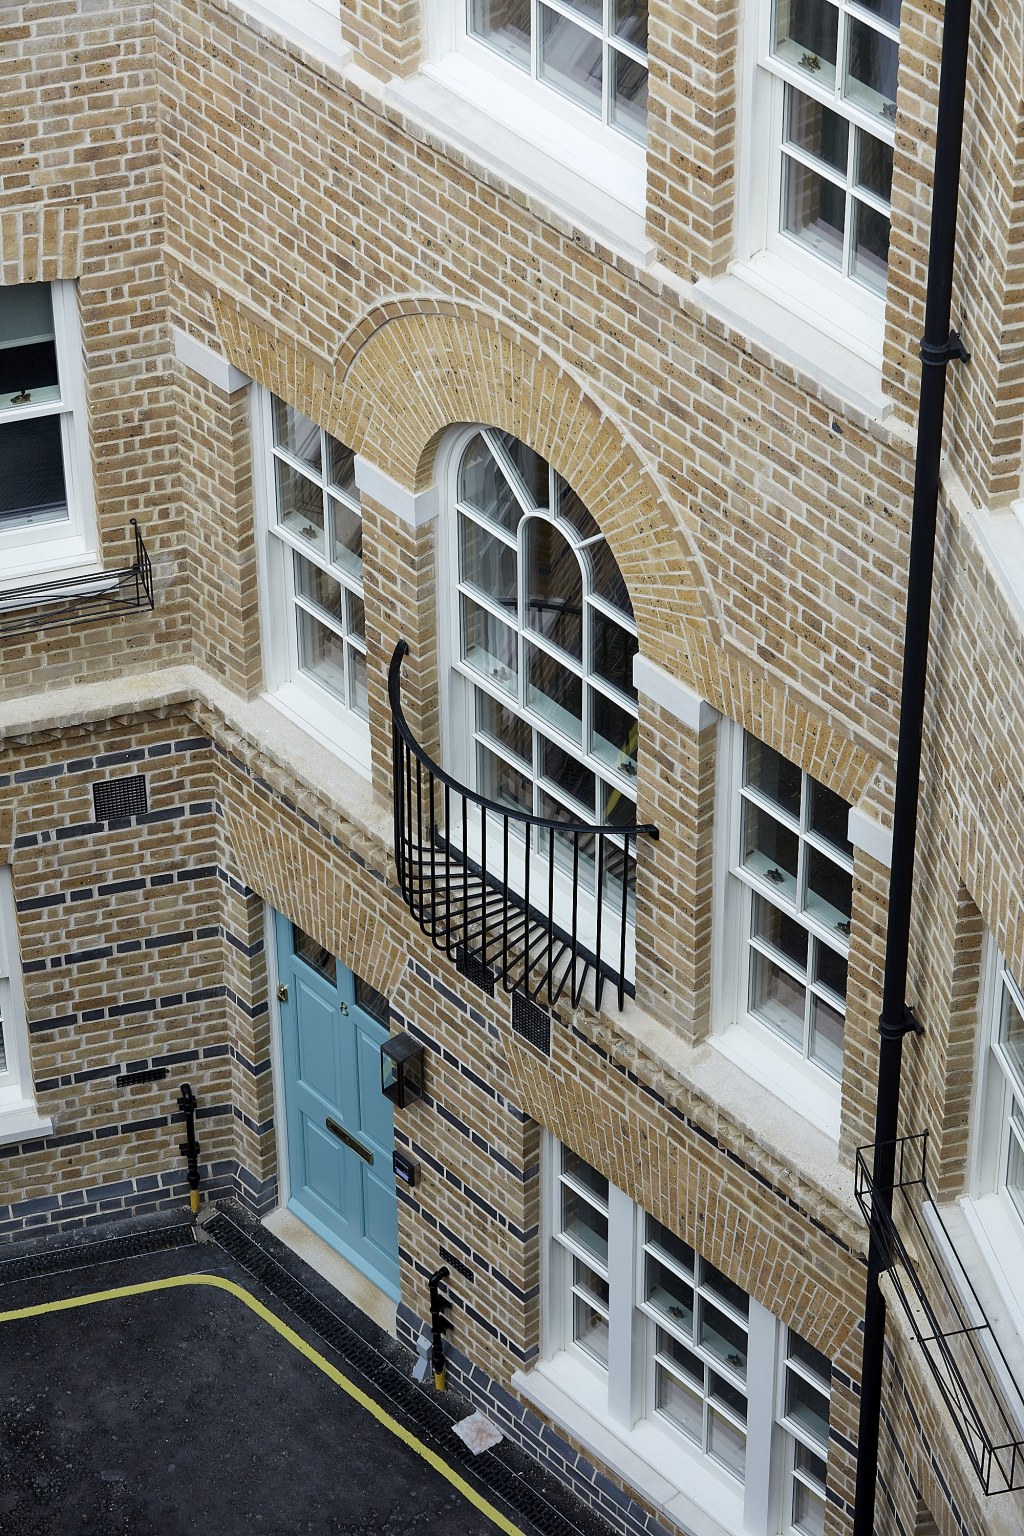 Replacement homes on Dean's Mews, London / Deans' Mews